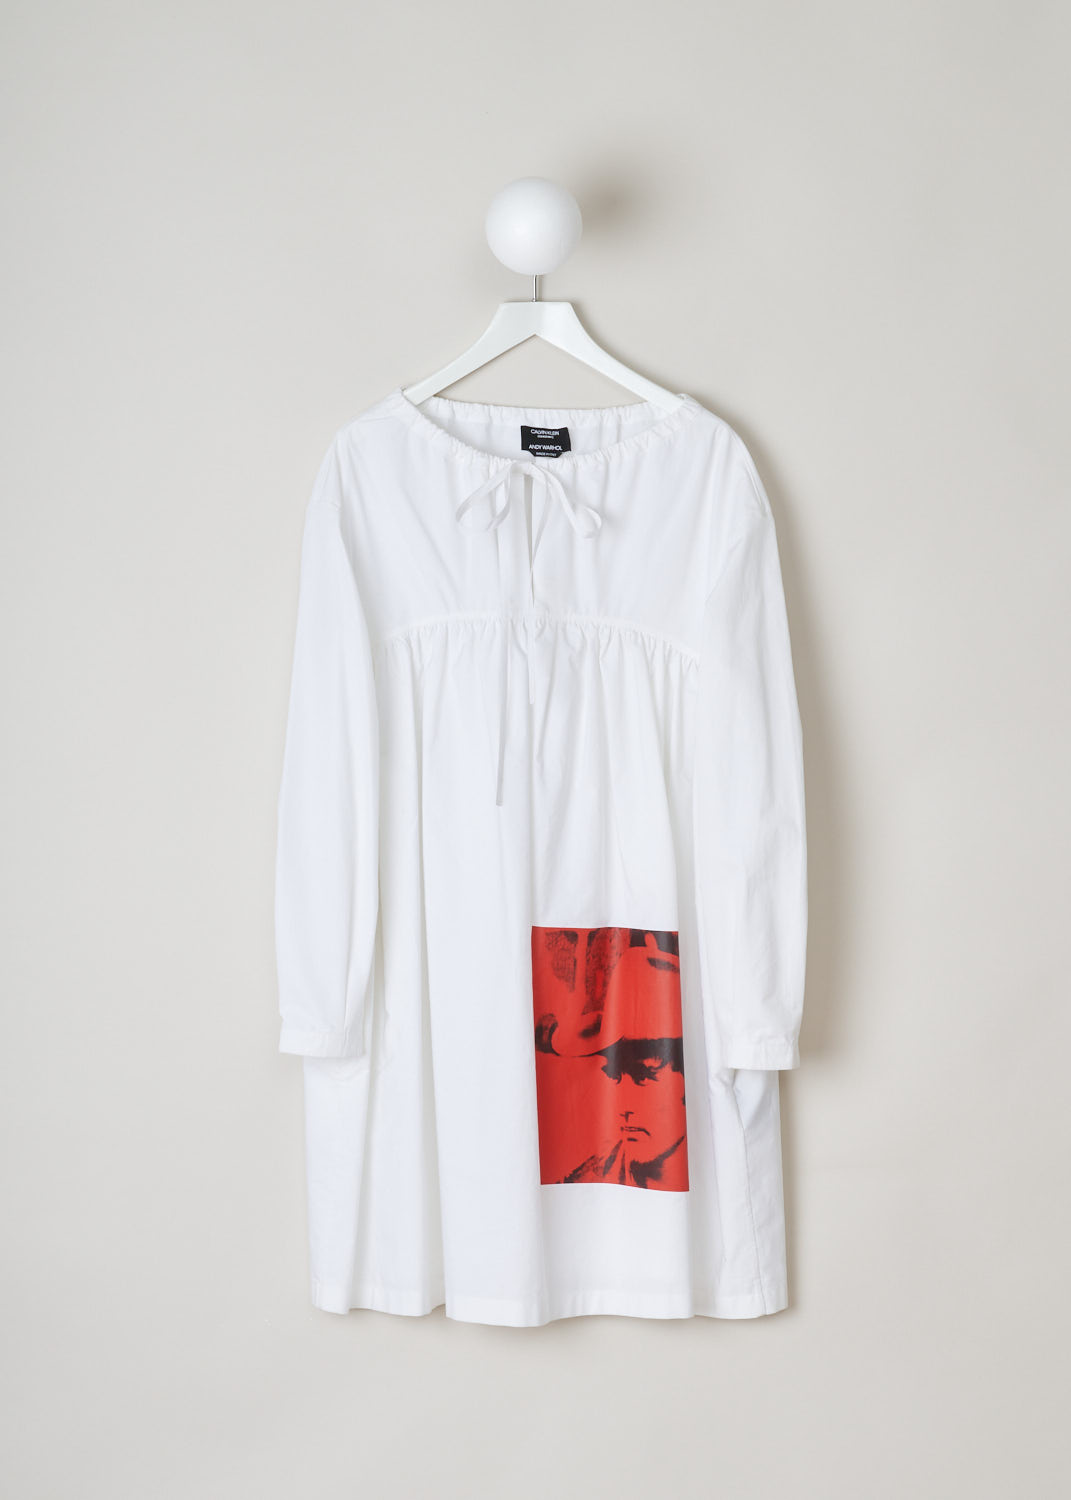 Calvin Klein 205w39nyc, White tent dress, 82WWDD16_C038_100, white red, front, White dress featuring a red Andy Warhol print on the front. Comes with a drawstring tunnel at the neckline to adjust the width. A similar drawstring tunnel can be found at chest height. The long sleeves are cuffed without any buttons. 
There are two pockets on each of the side seams.